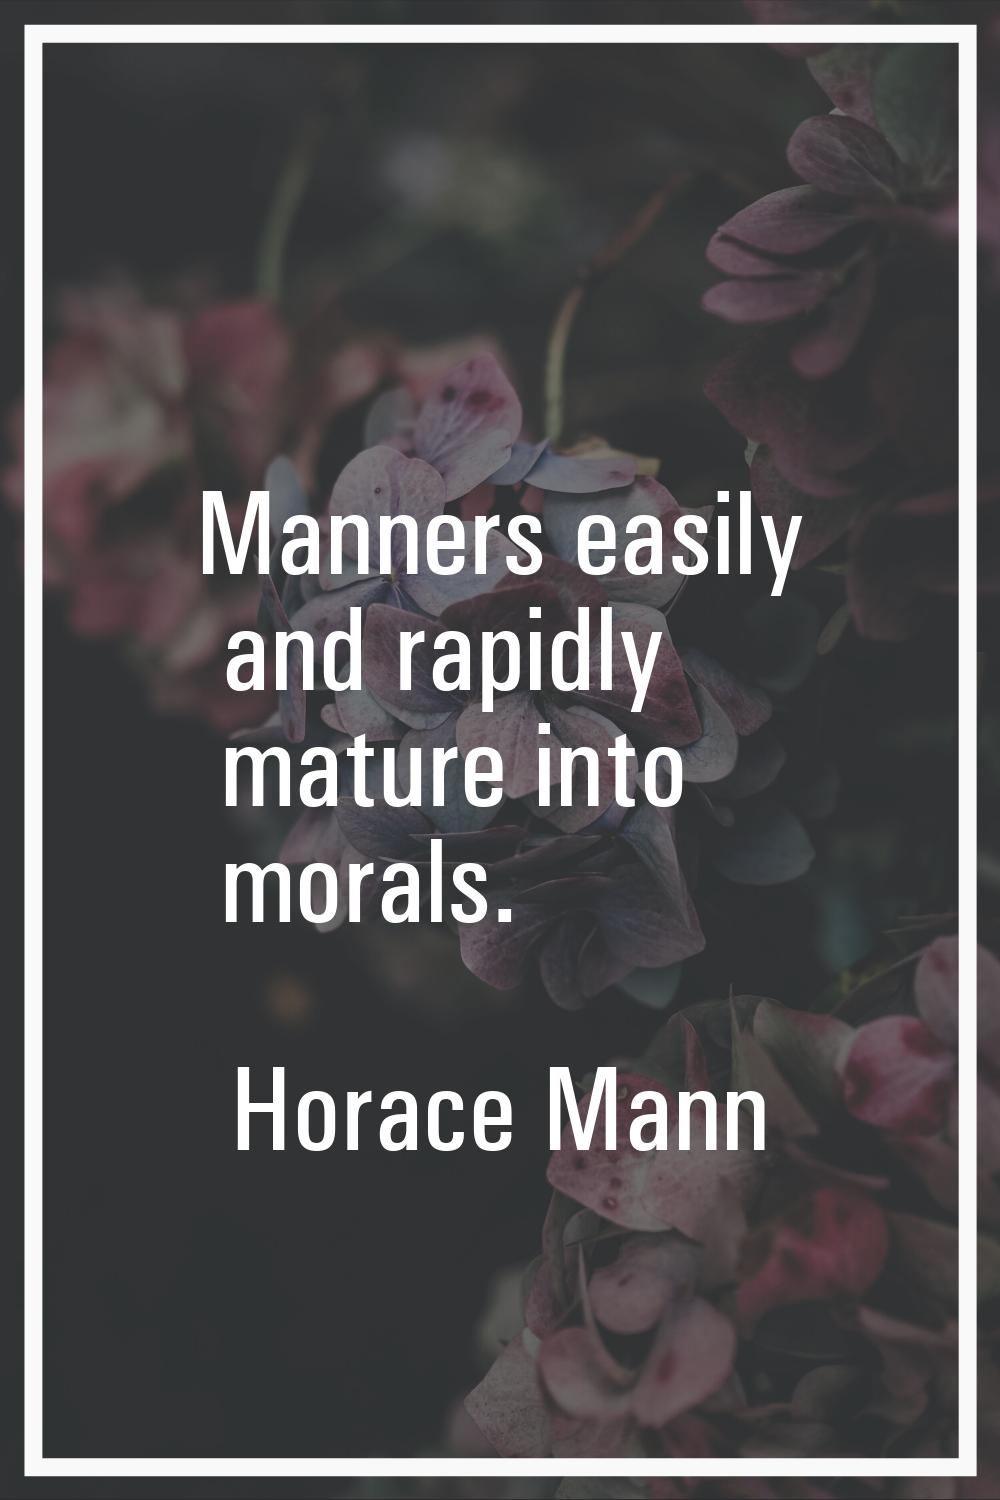 Manners easily and rapidly mature into morals.